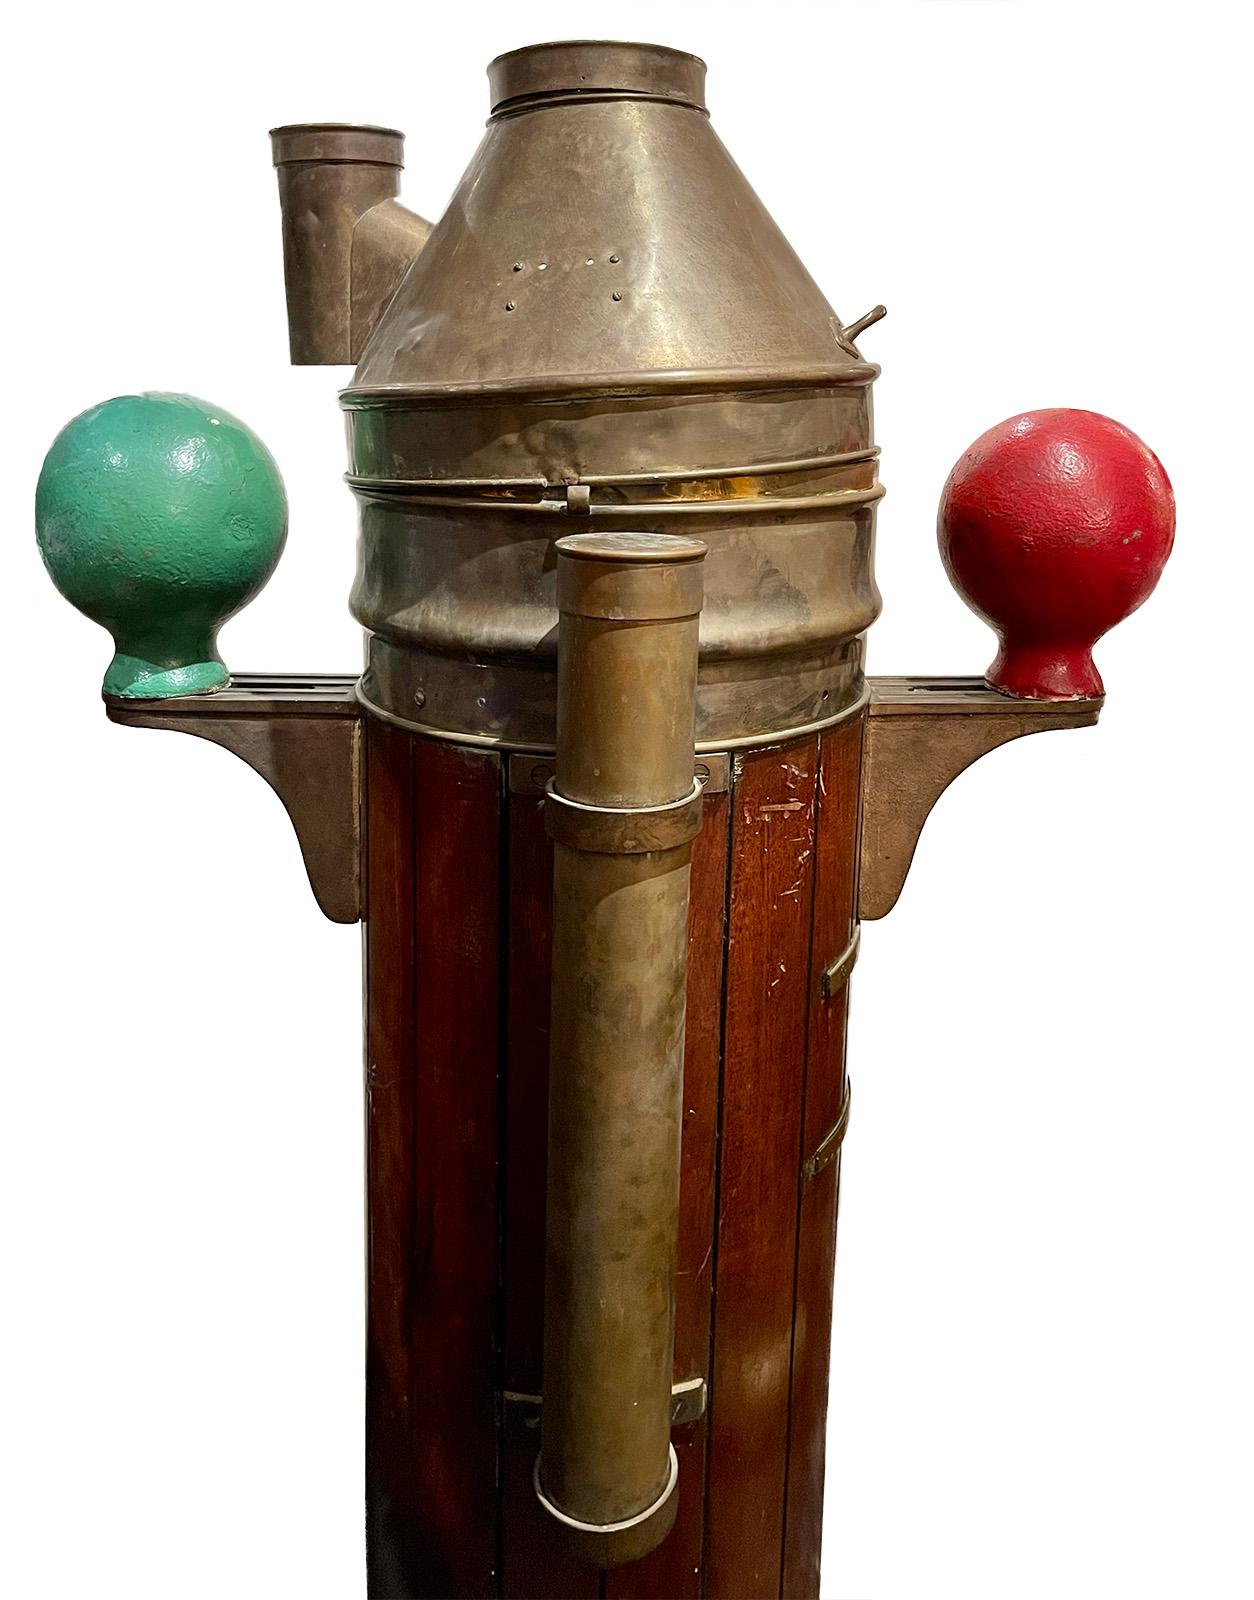 Solely made by Kelvin Bottomley & Baird, Ltd., Glasgow / London. Compass made by Henry Browne & Sons, Ltd. A standard binnacle form in brass housing with arms set with red and green painted iron Kelvin's balls. Small enamel dial on the front with